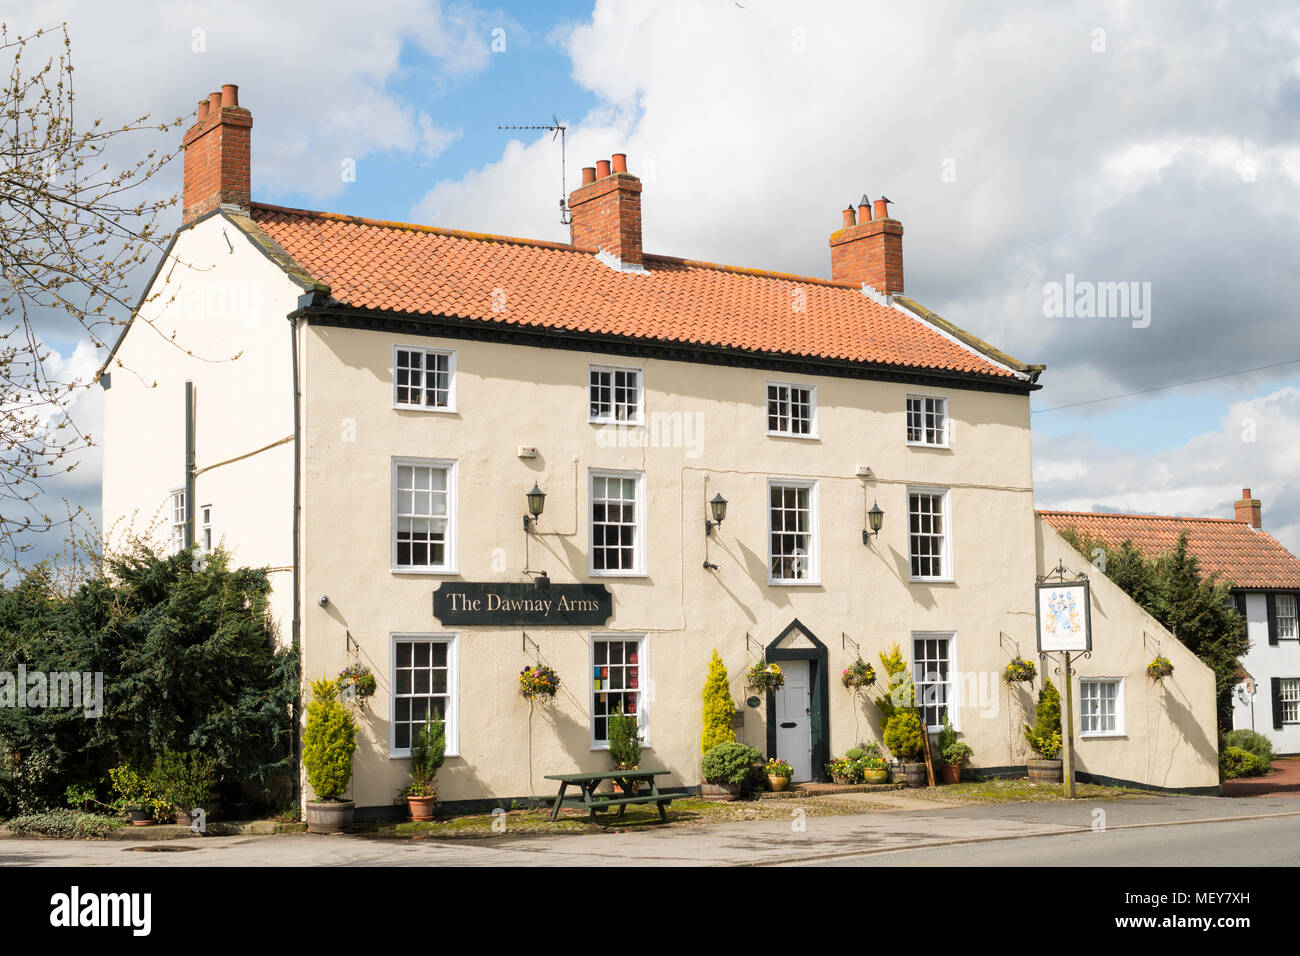 The Dawnay Arms an 18th century building, now a pub and restaurant, Newton-on-Ouse, North Yorkshire, England, UK Stock Photo